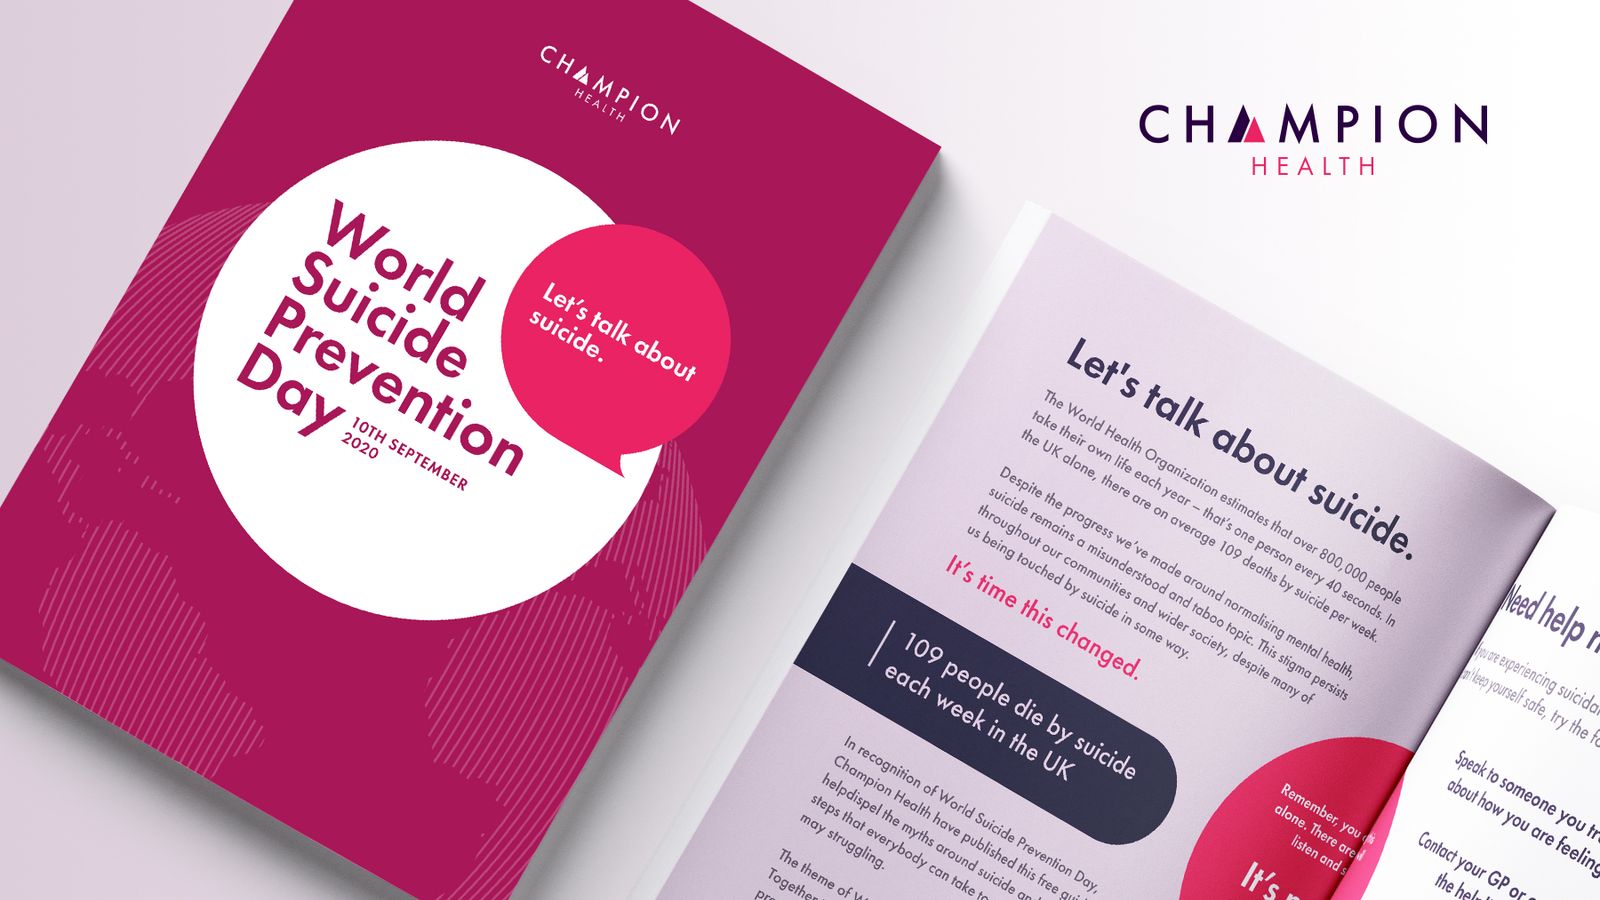 Mental health firm creates guide to mark World Suicide Prevention Day